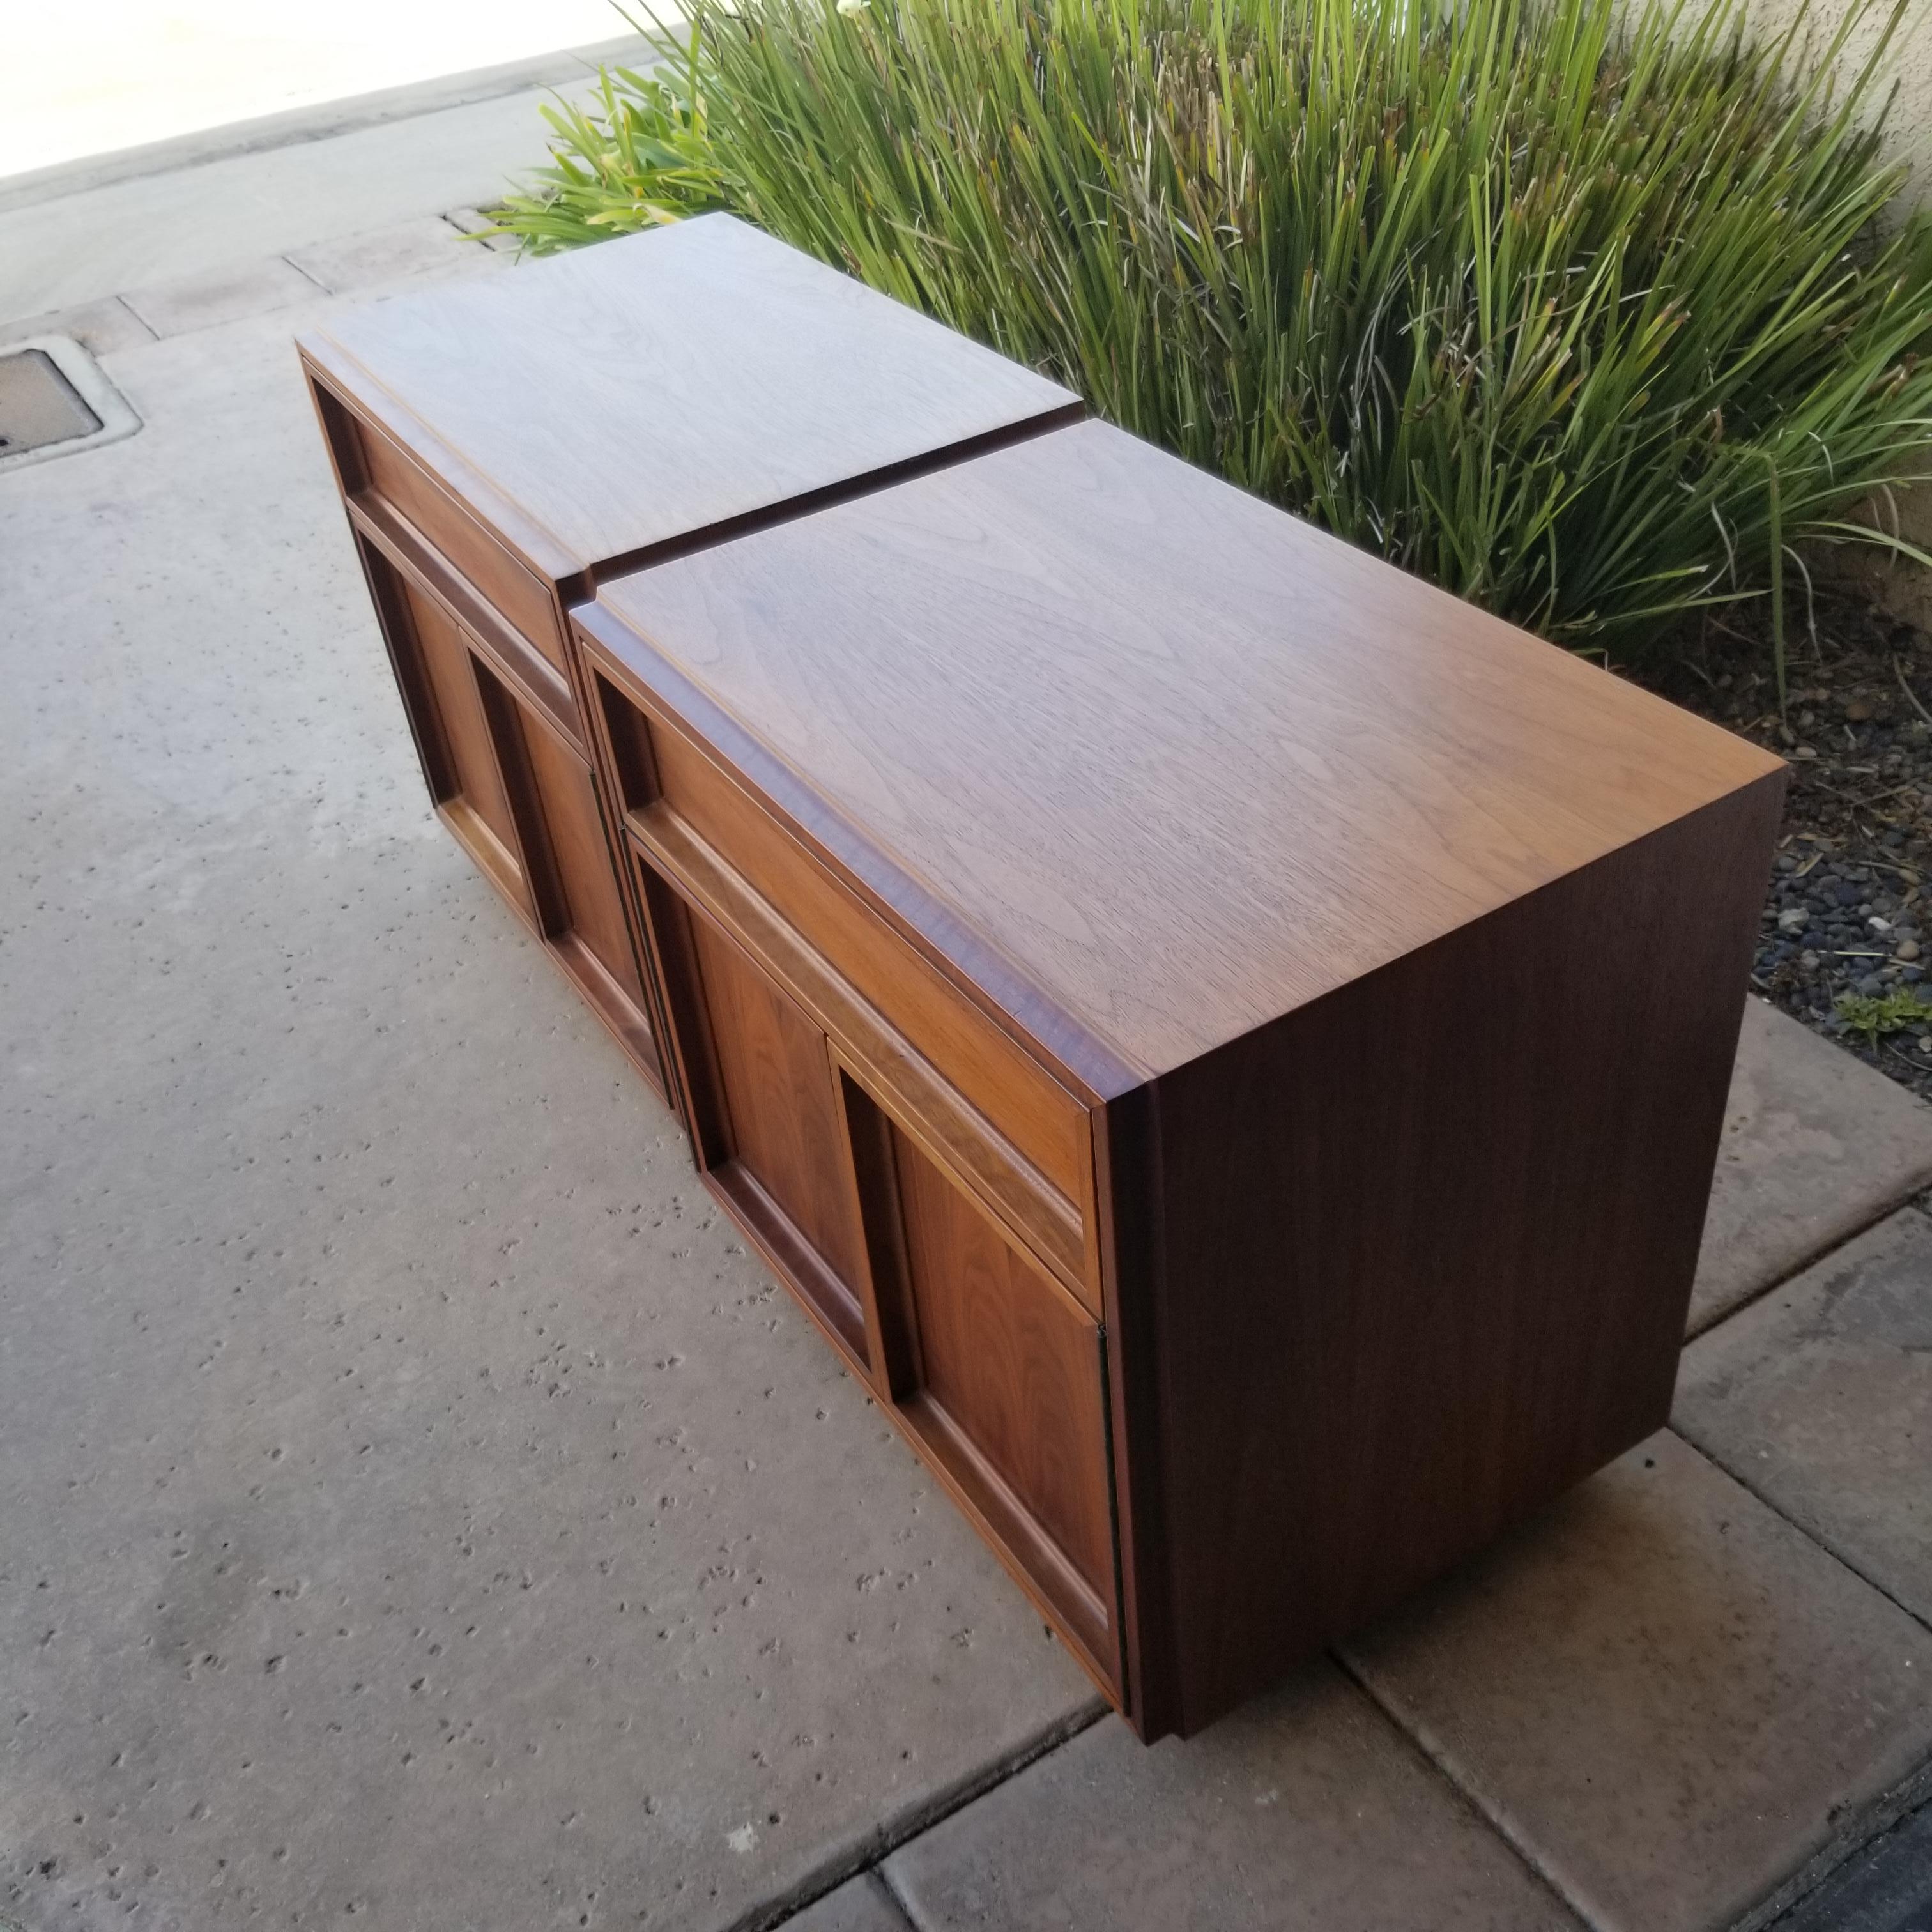 Nightstands
1960s designer John Keal for Brown Saltman Crisp Modern Walnut Wood Nightstands
Designed with Spacious Drawer and Cabinet. Ideal as small cabinet or nightstands.
24 w x 16.5 d x 22 tall inches
Hidden sculptural built-in pull handle.